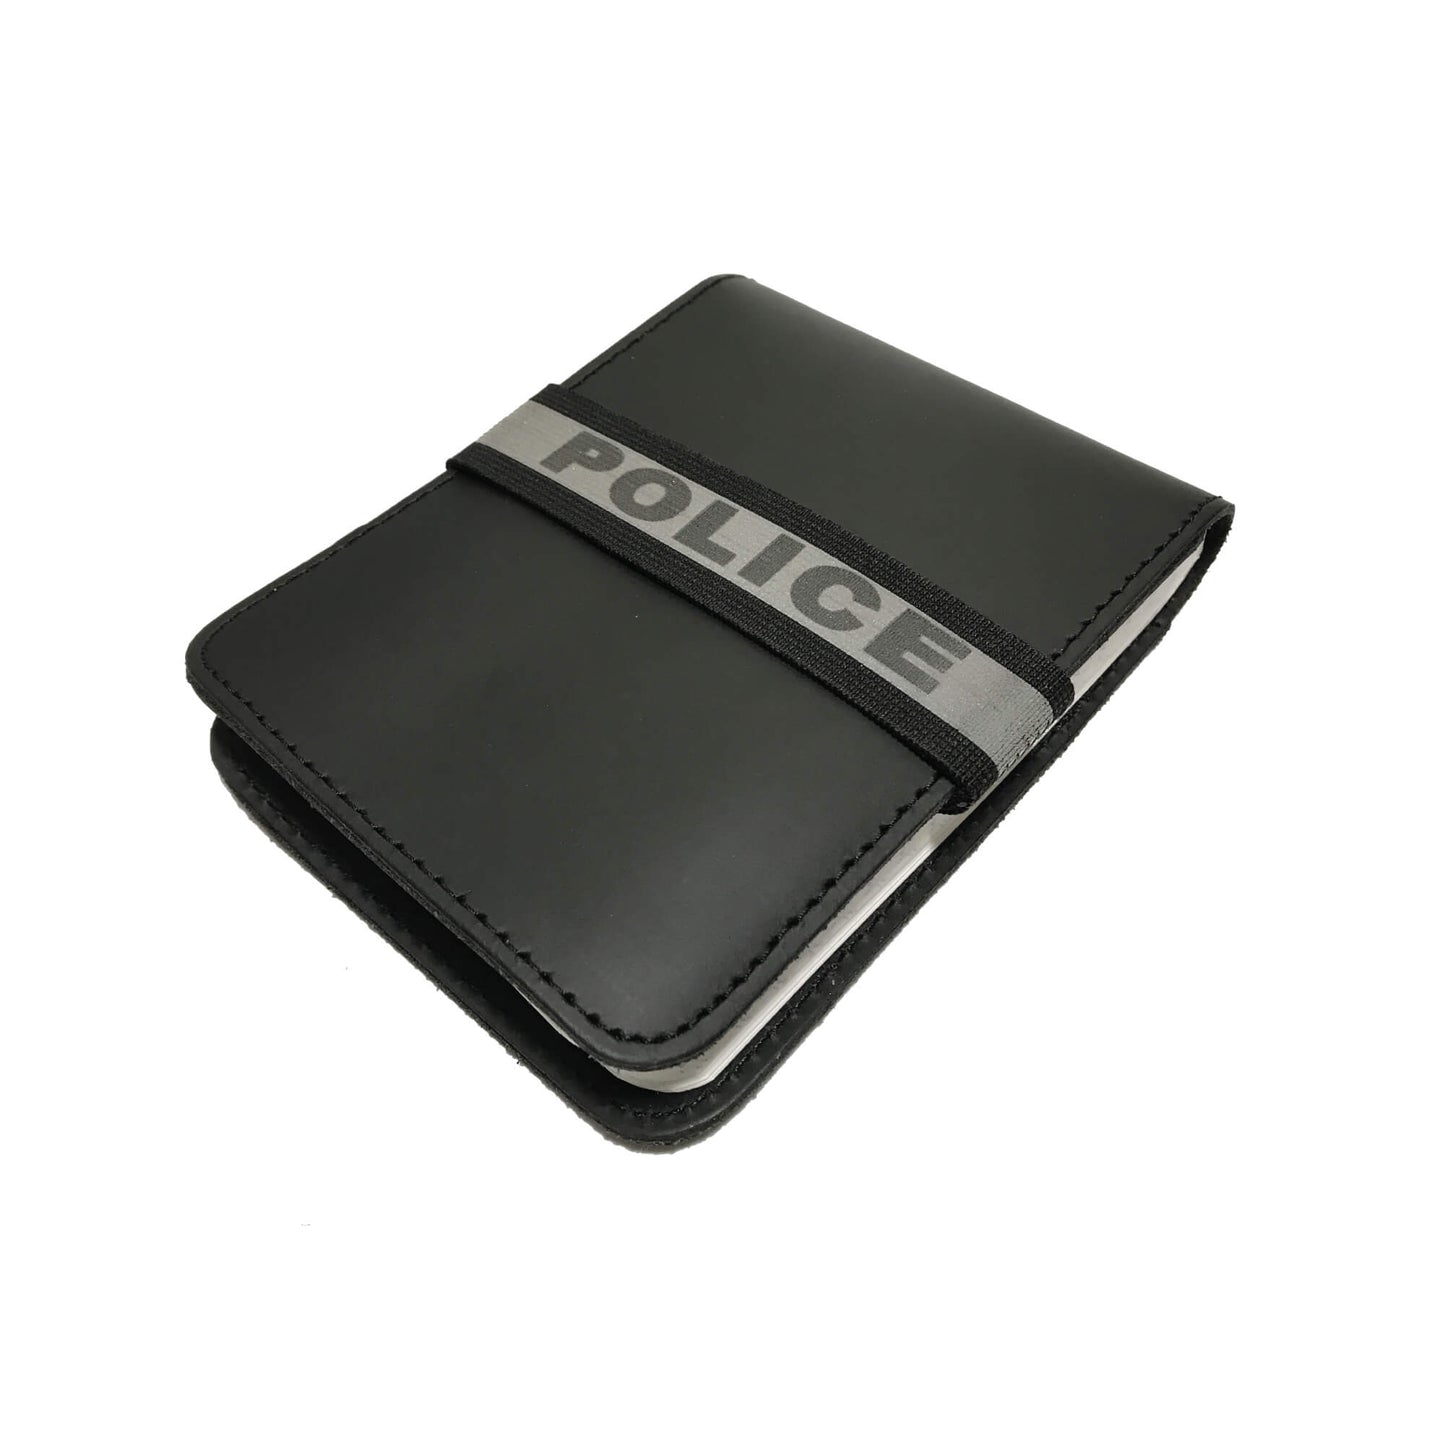 CP Pacific Rail Police Notebook Cover-Perfect Fit-911 Duty Gear Canada